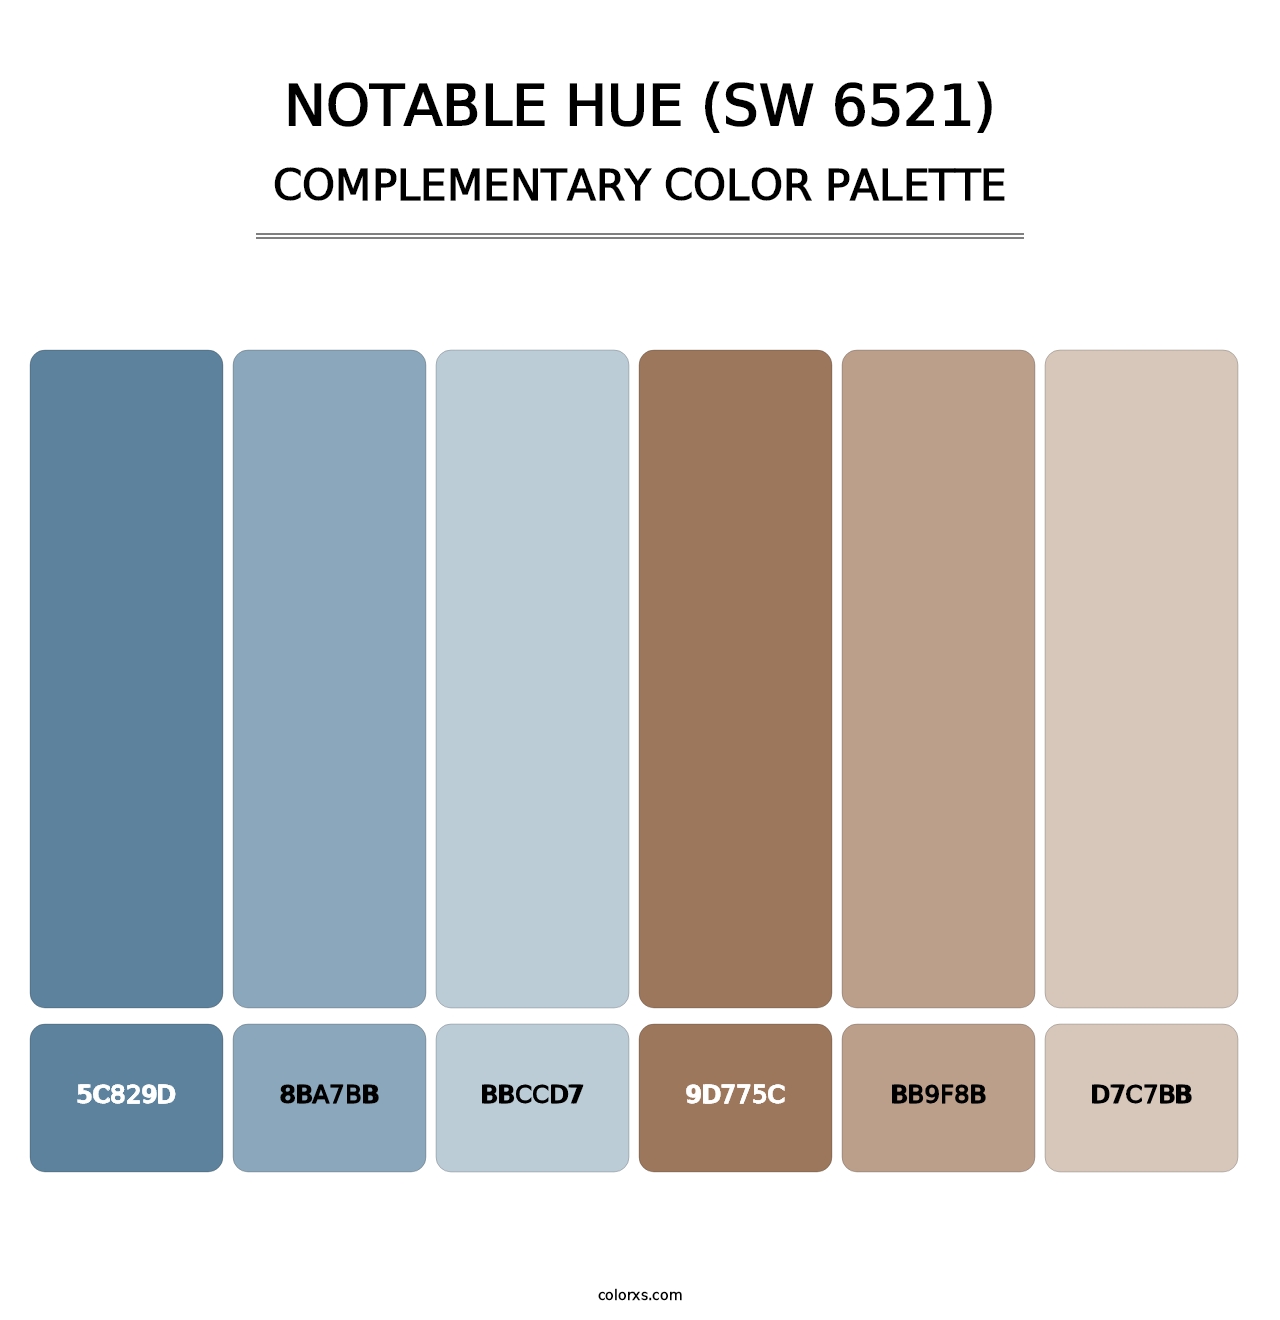 Notable Hue (SW 6521) - Complementary Color Palette